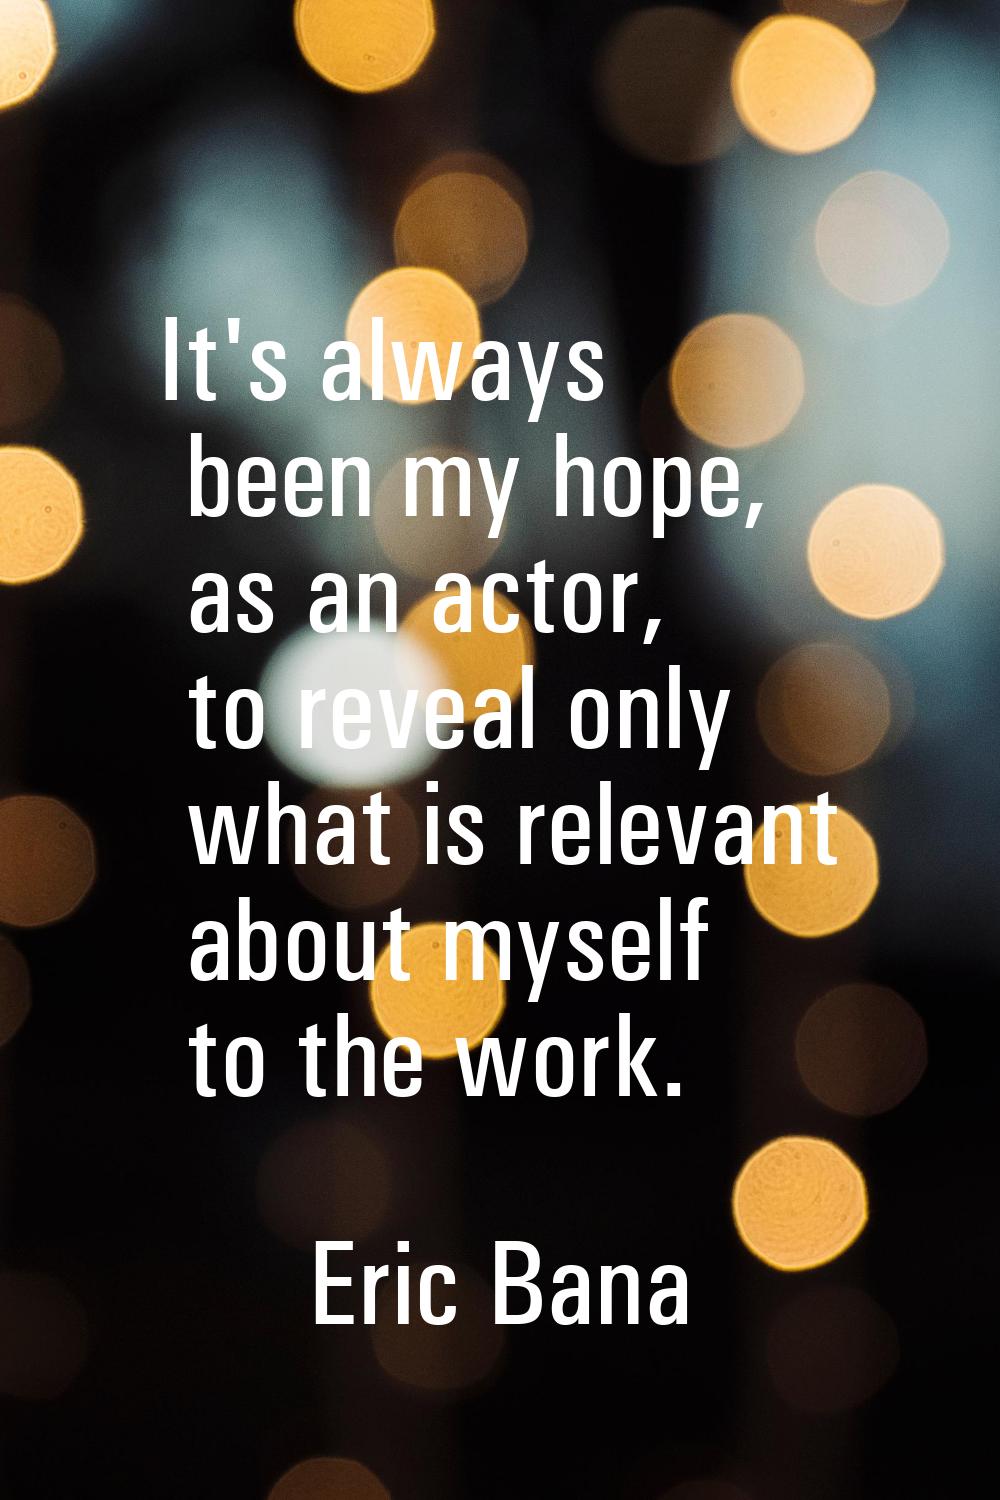 It's always been my hope, as an actor, to reveal only what is relevant about myself to the work.